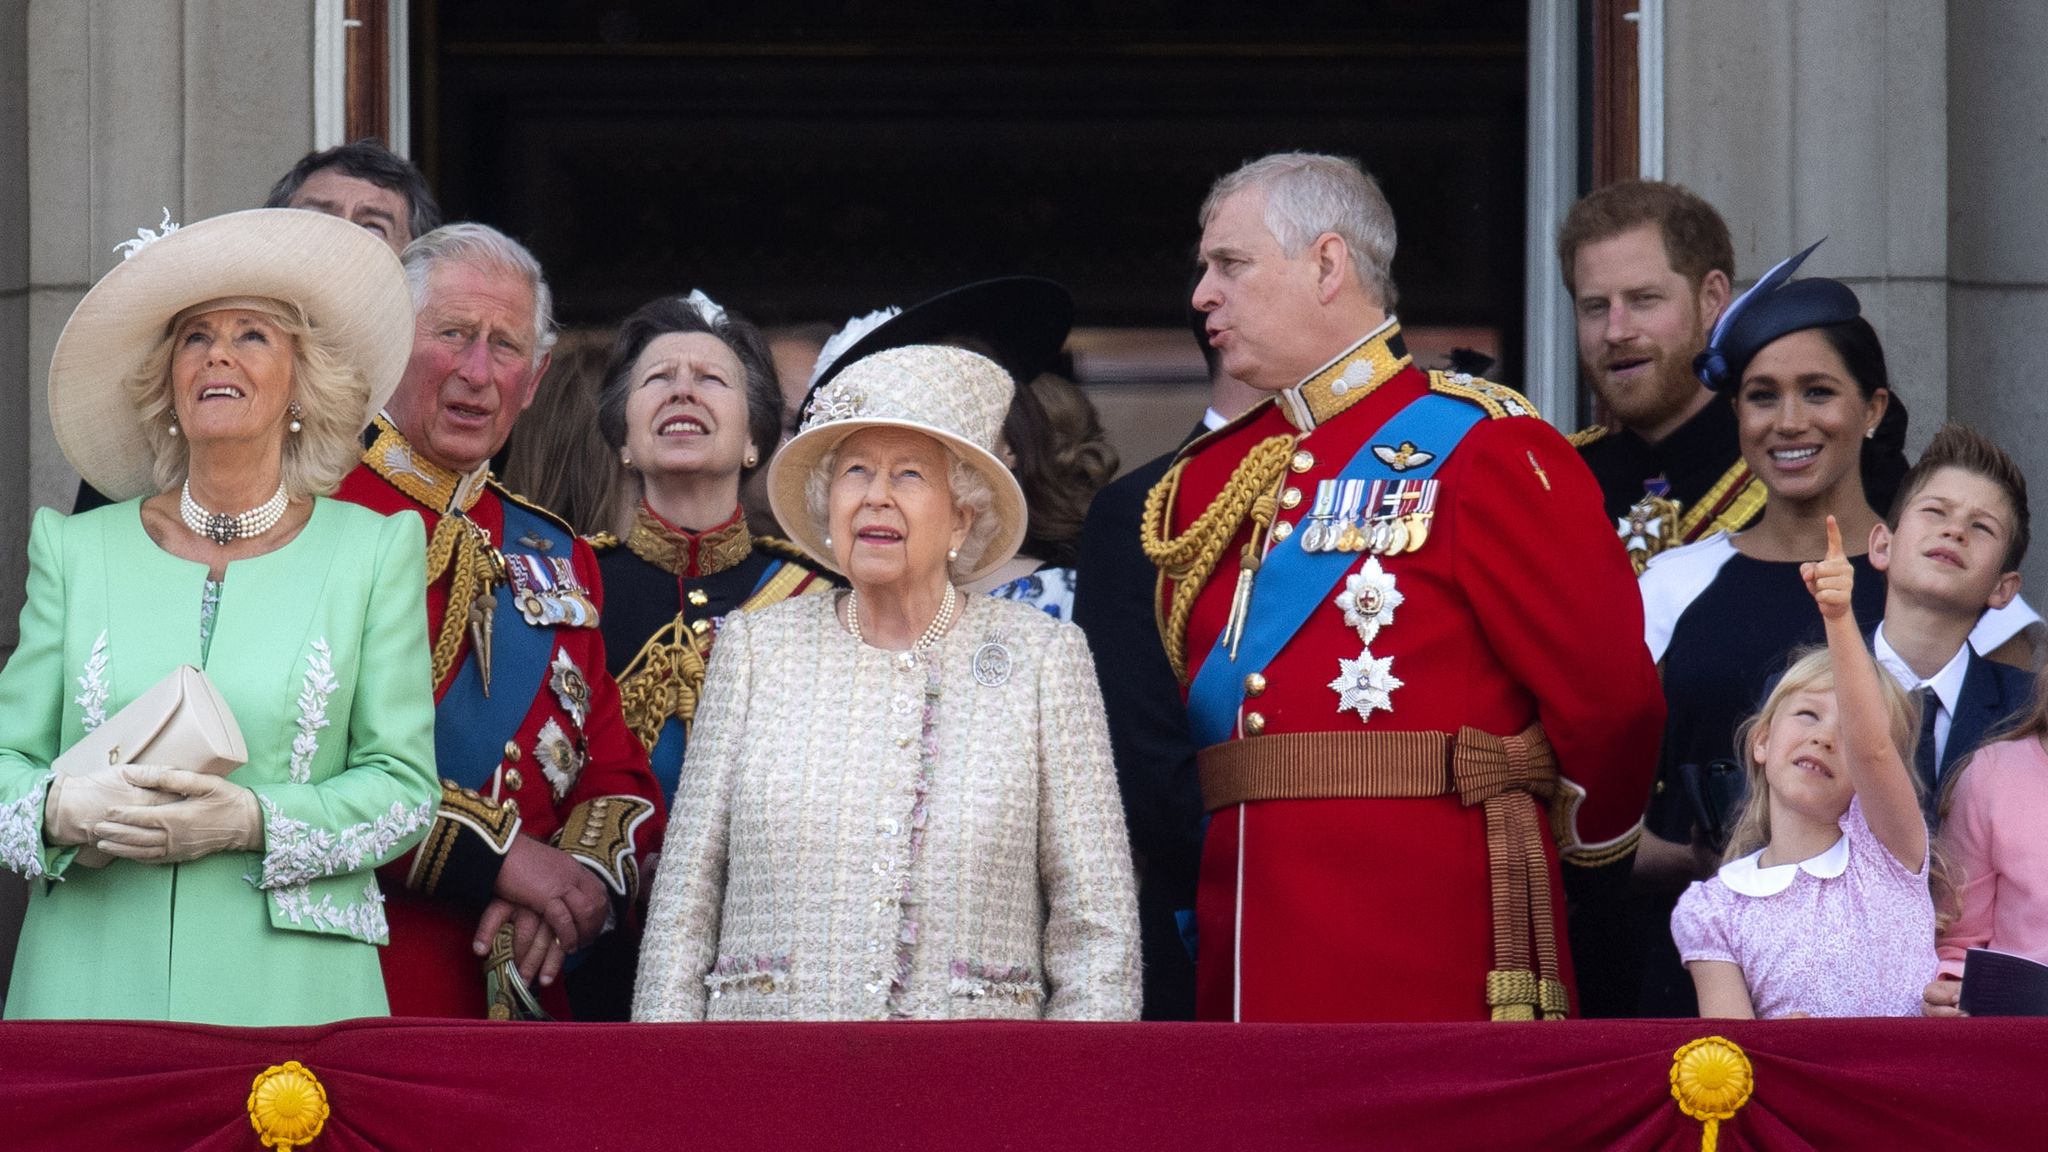 The Queen’s Celebrations And The Family’s Drama-Free Reunion